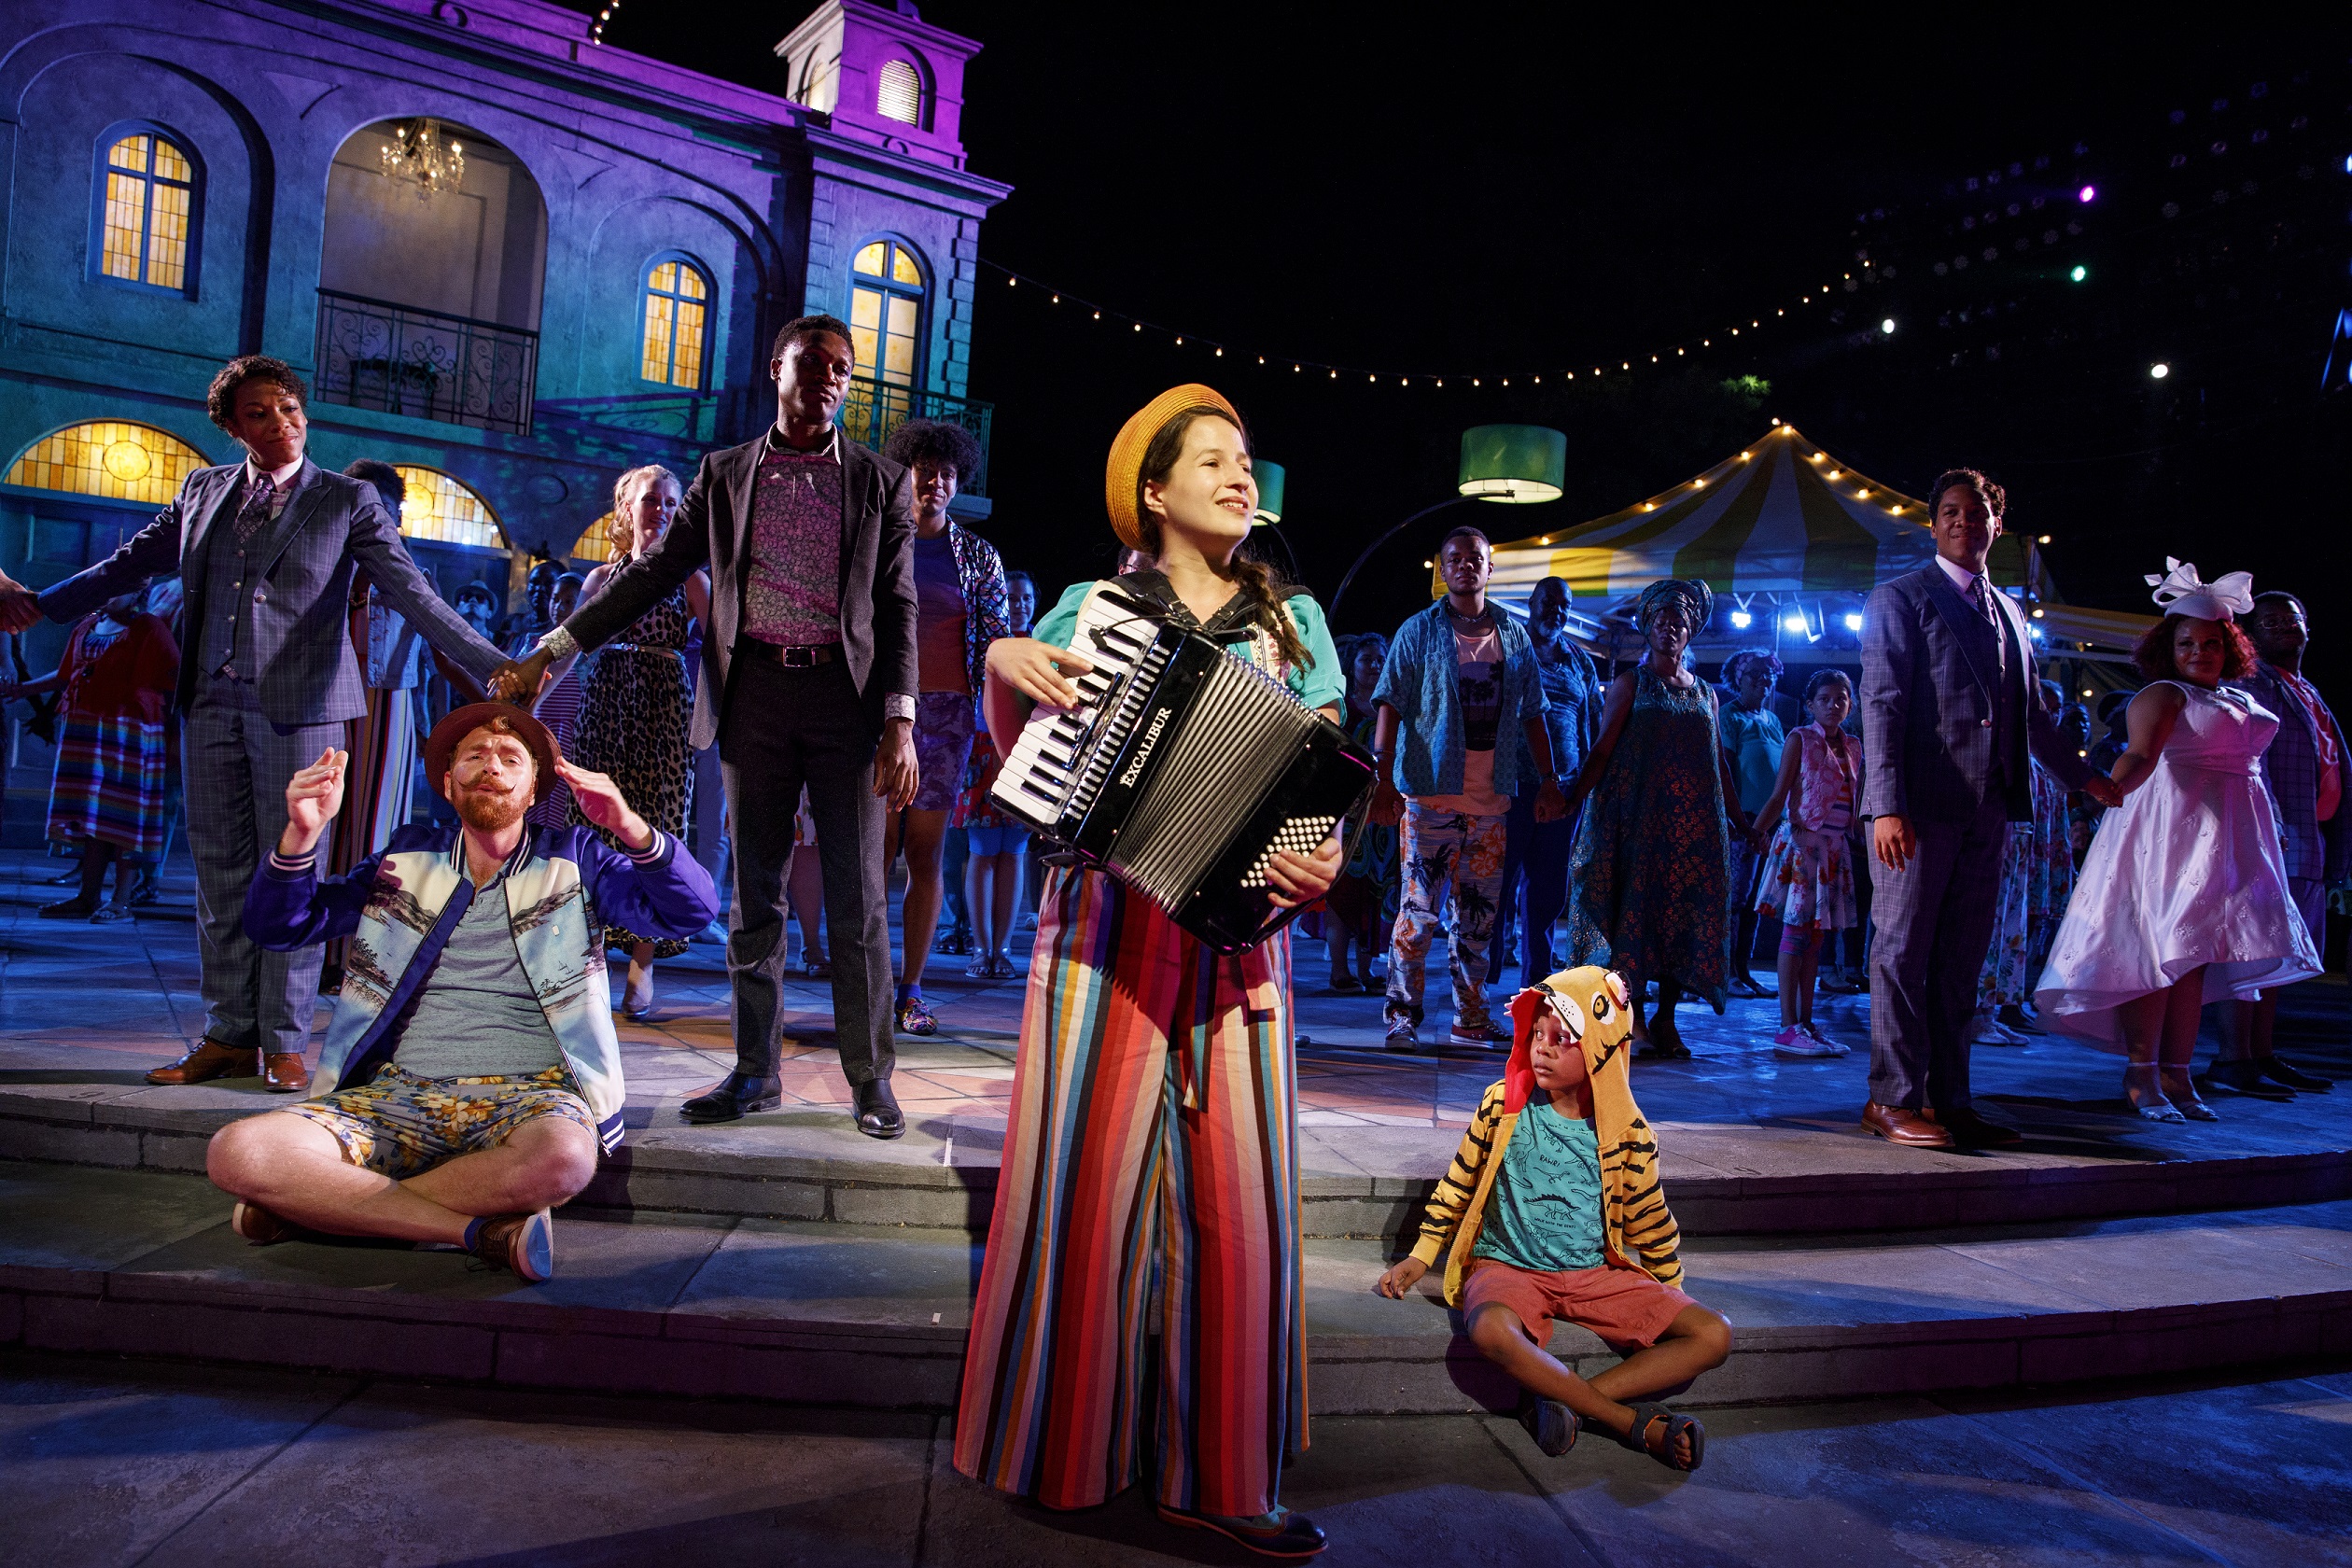 Shaina Taub as The Fools plays the accordion in the stage production of the musical cast album Twelfth Night.